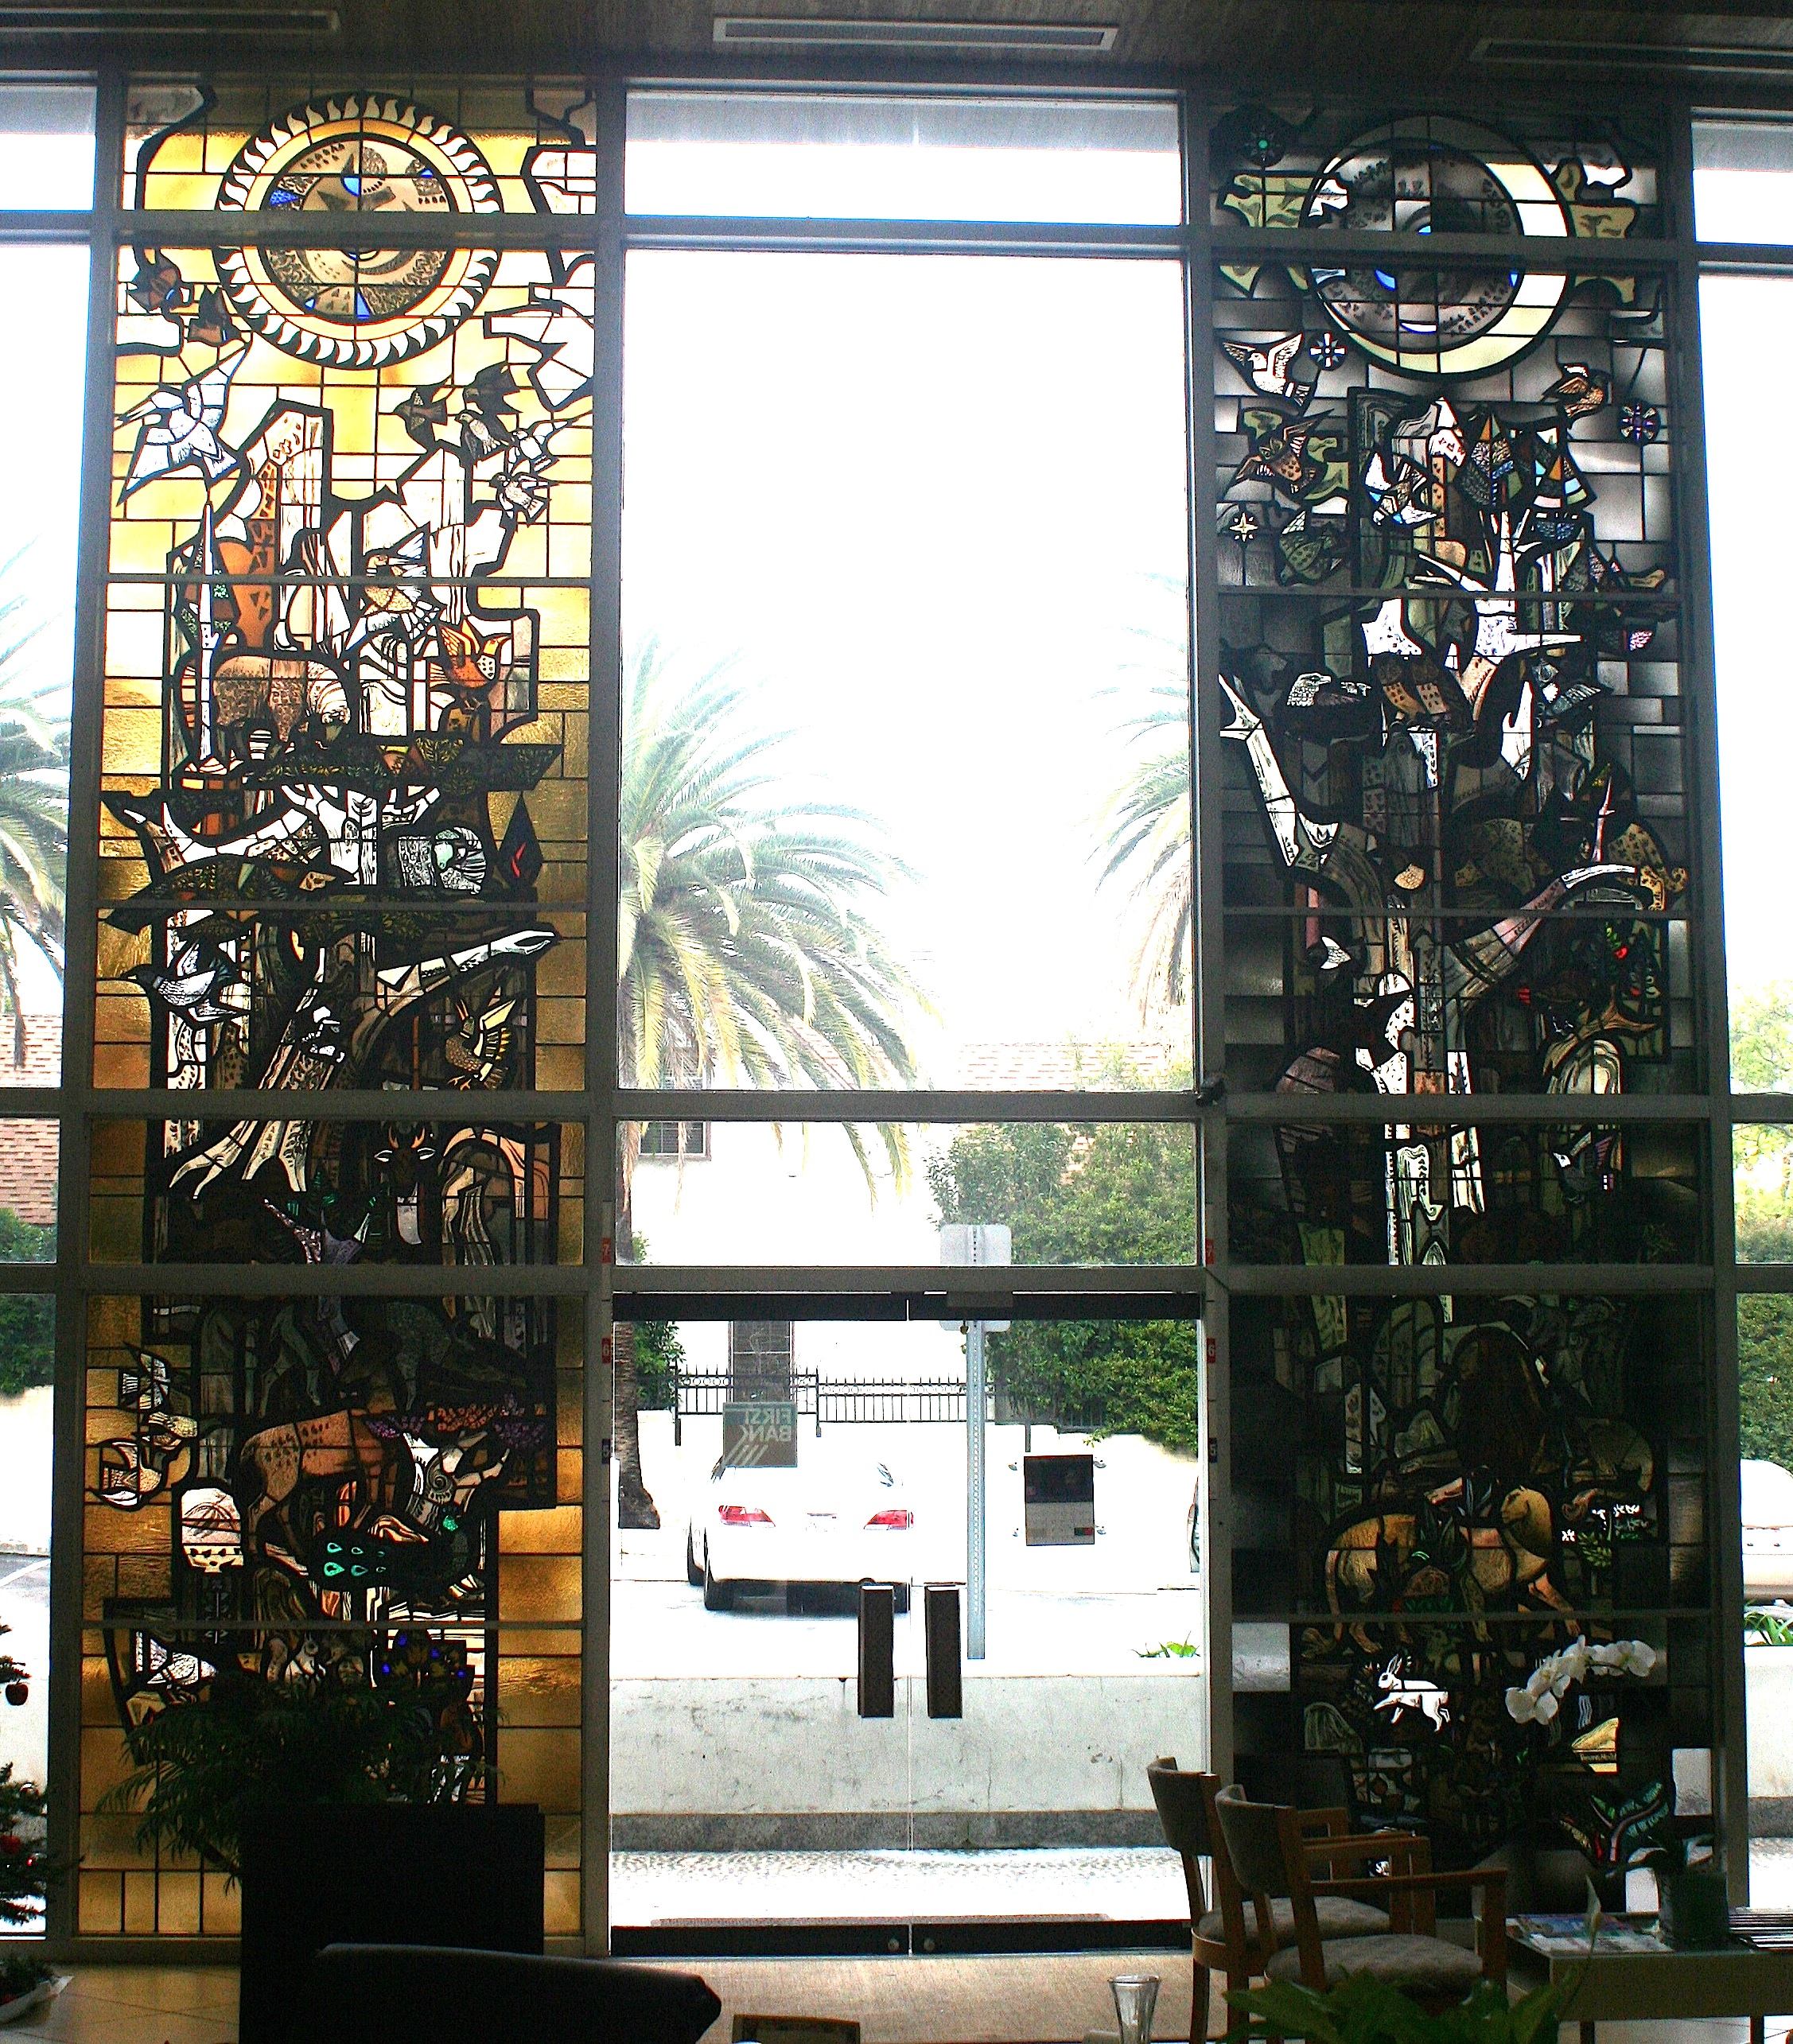 Susan Lautmann Hertel, "Day" and "Night" stained glass, Ahmanson Bank and Trust, 1959